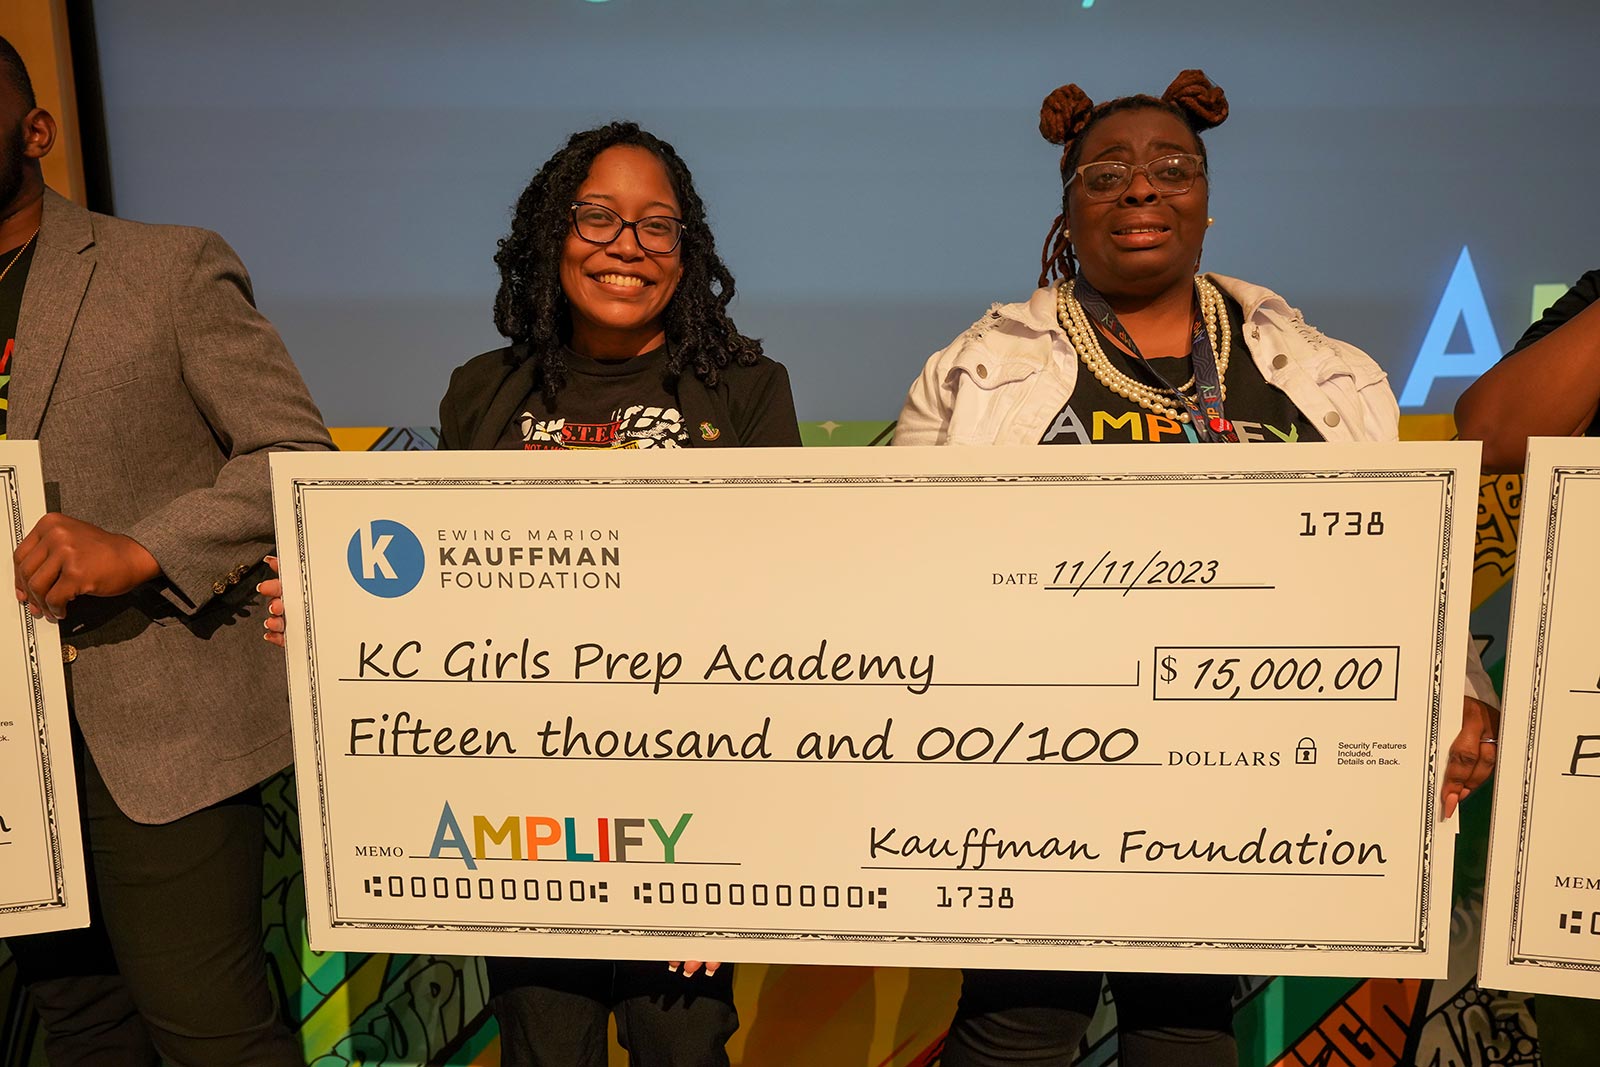 Amplify attendees hold a life-sized check made out to KC Girls Prep Academy for $15,000 from the Kauffman Foundation